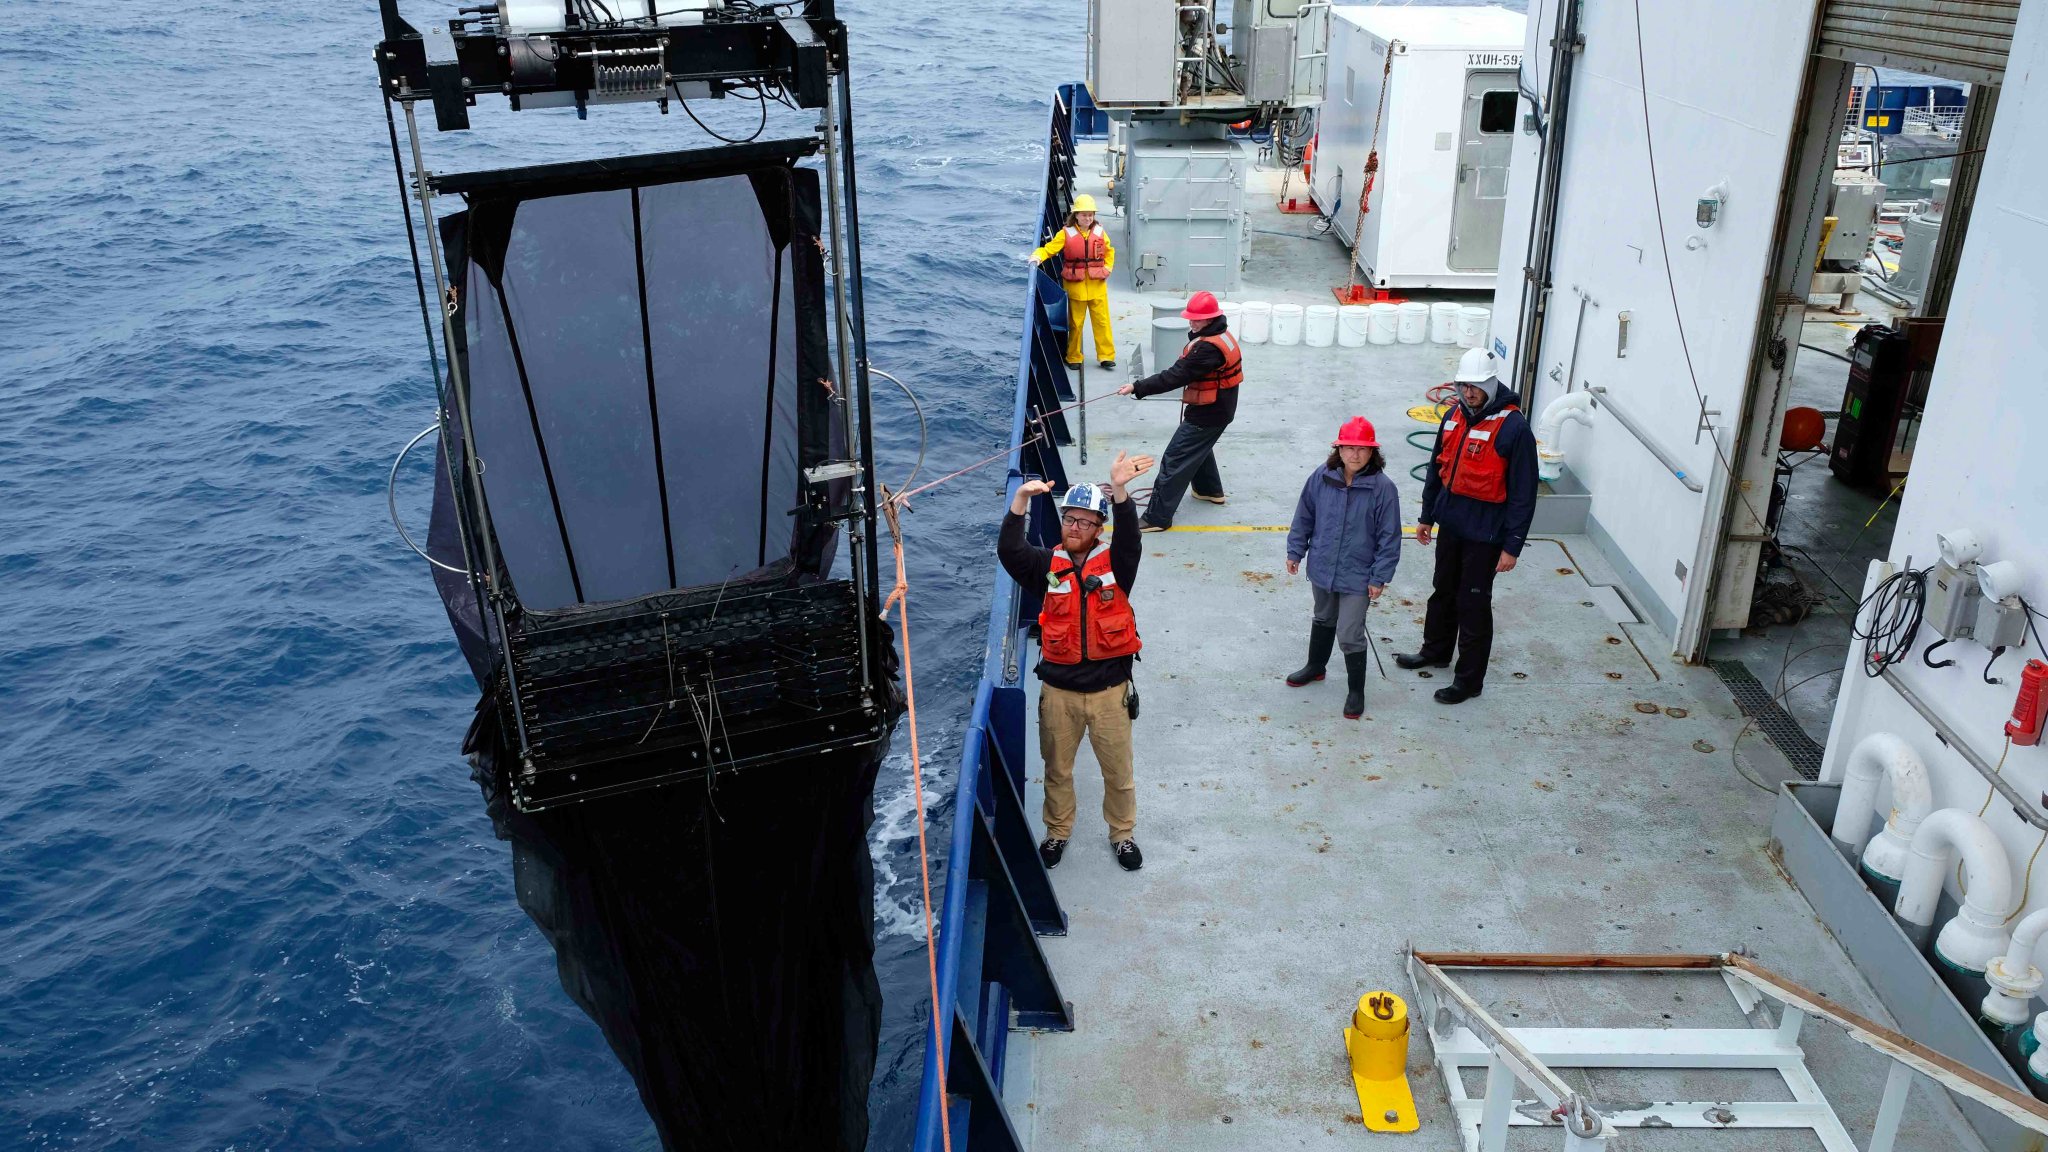 The Multiple Opening/Closing Net and Environmental Sensing System (MOCNESS) is deployed off the bow of the R/V <em>Roger Revelle</em>. This specialized net, which incorporates many different smaller nets, is towed behind a vessel, and enables the collection of plankton throughout the water column.